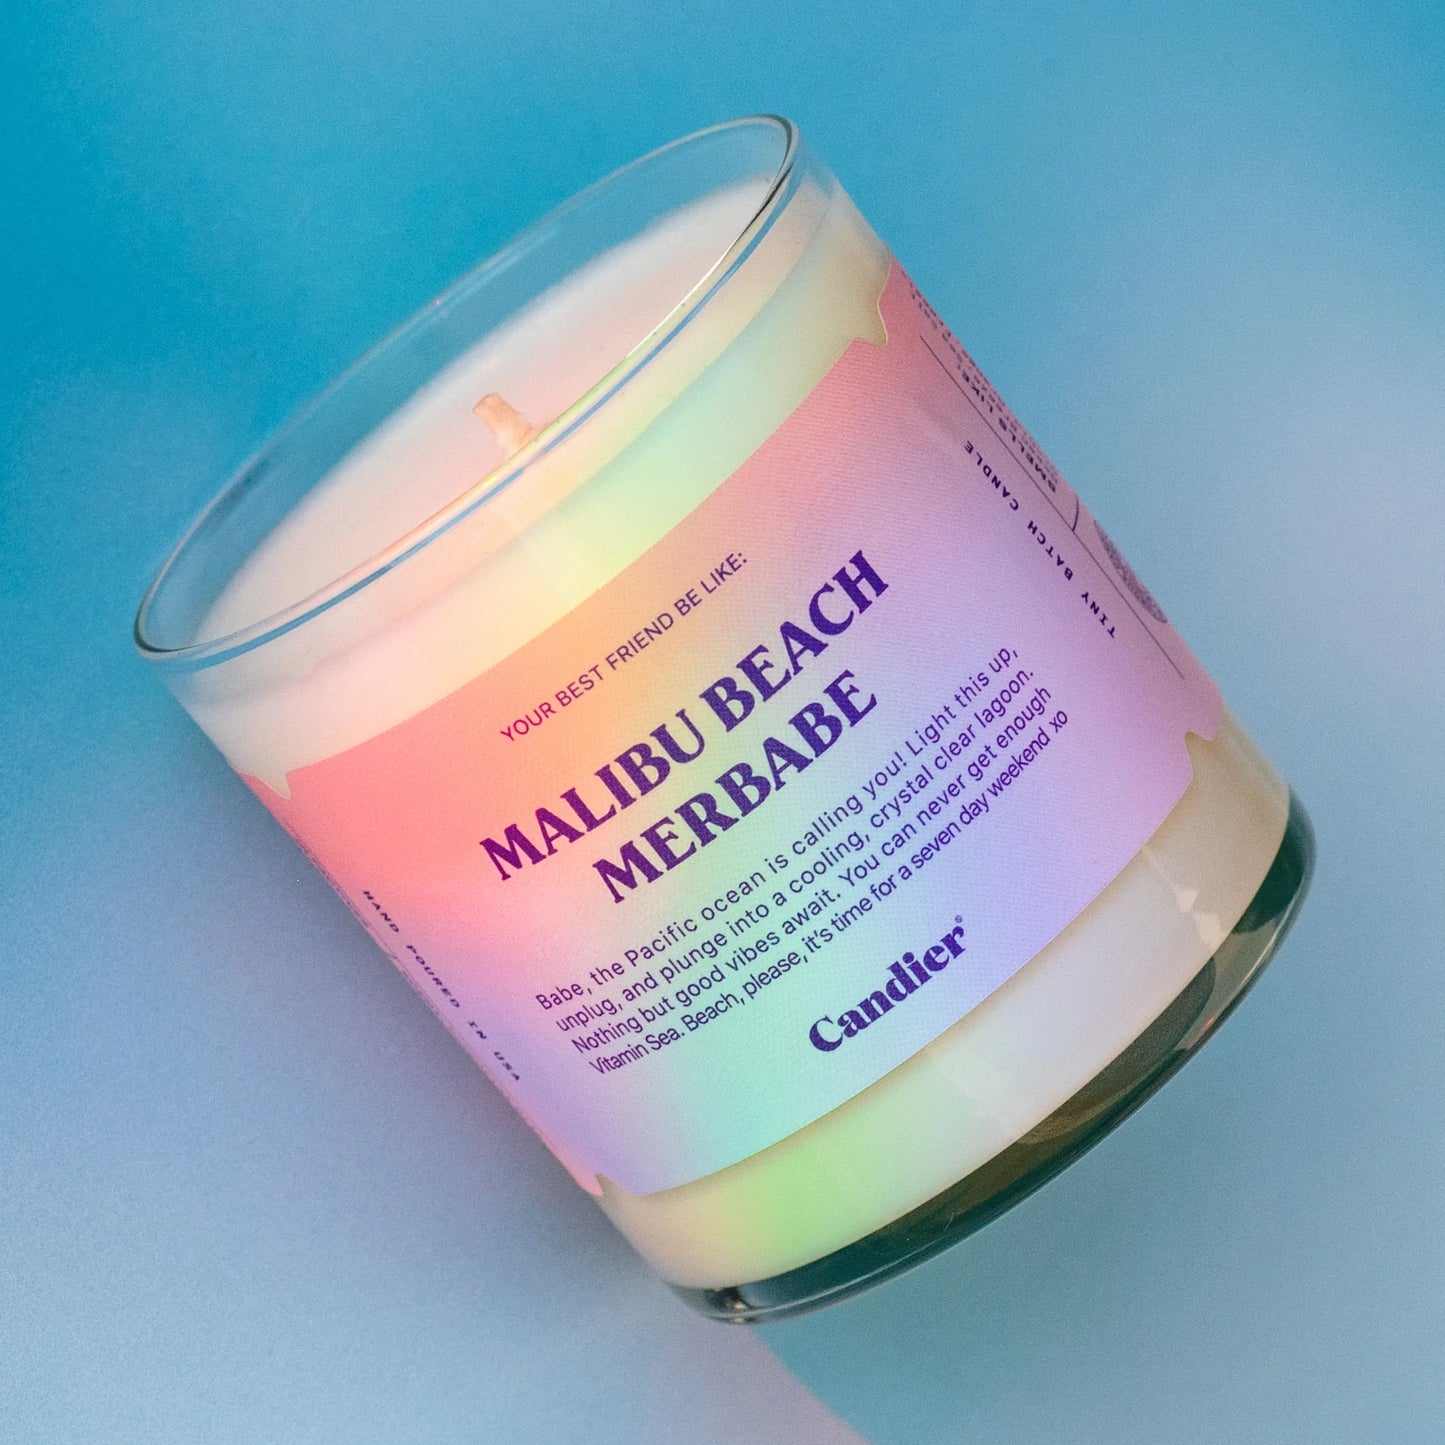 MERBABE CANDLE